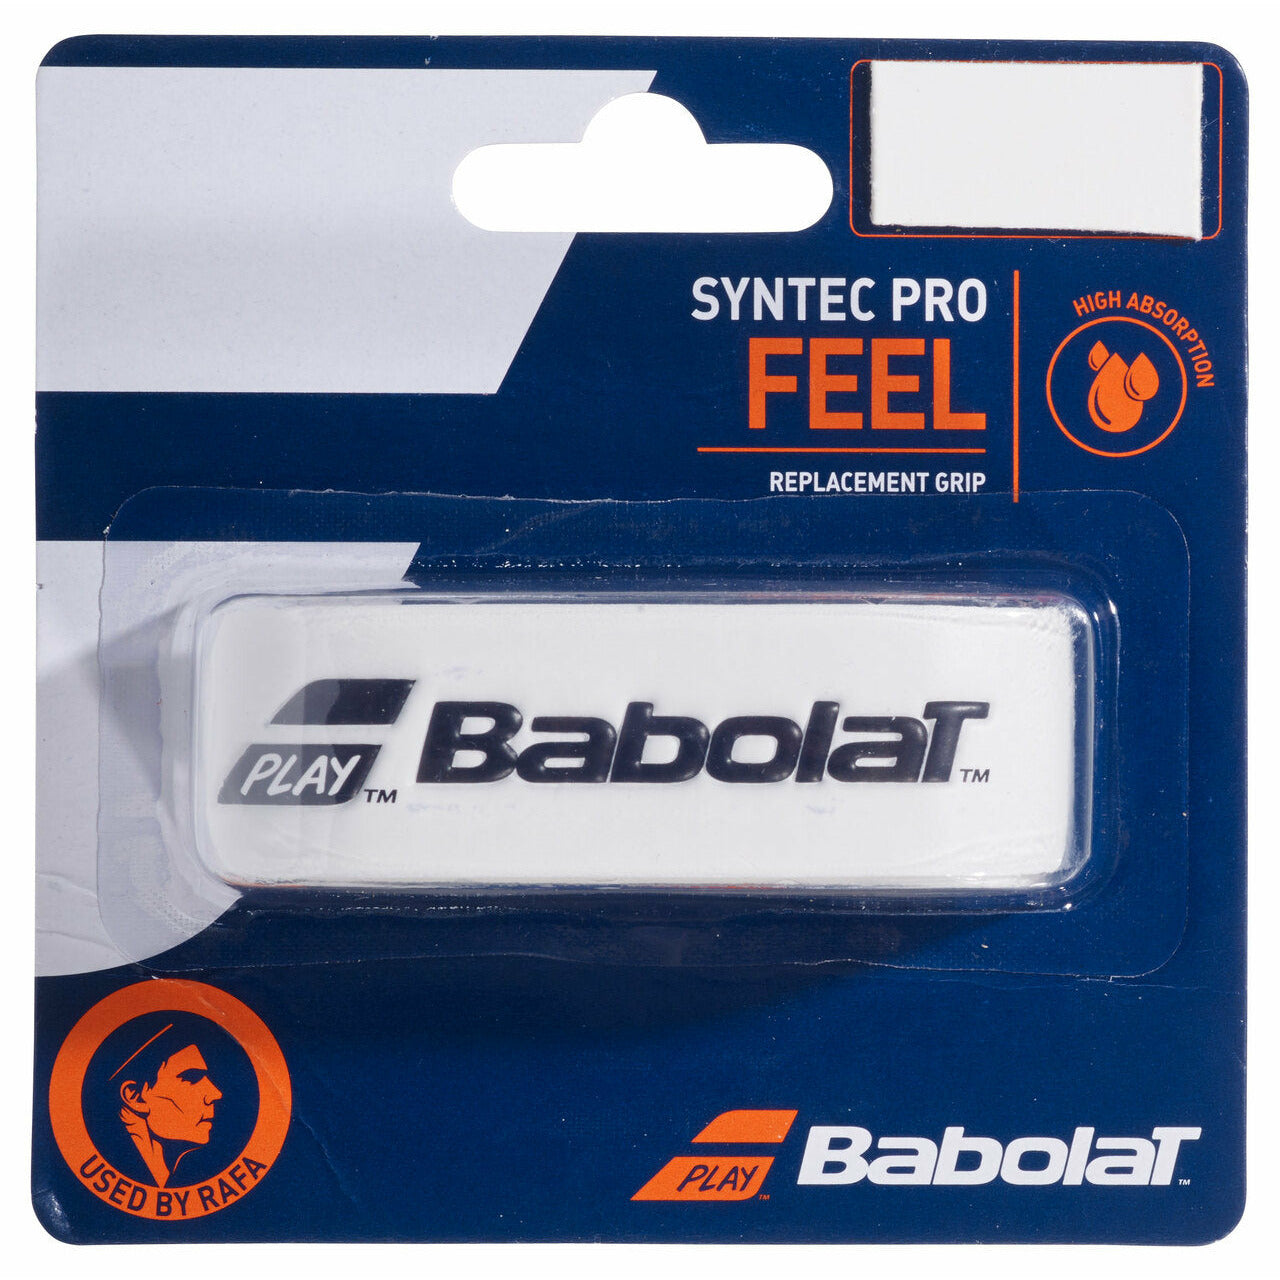 Babolat Syntec Pro Replacement Grip white